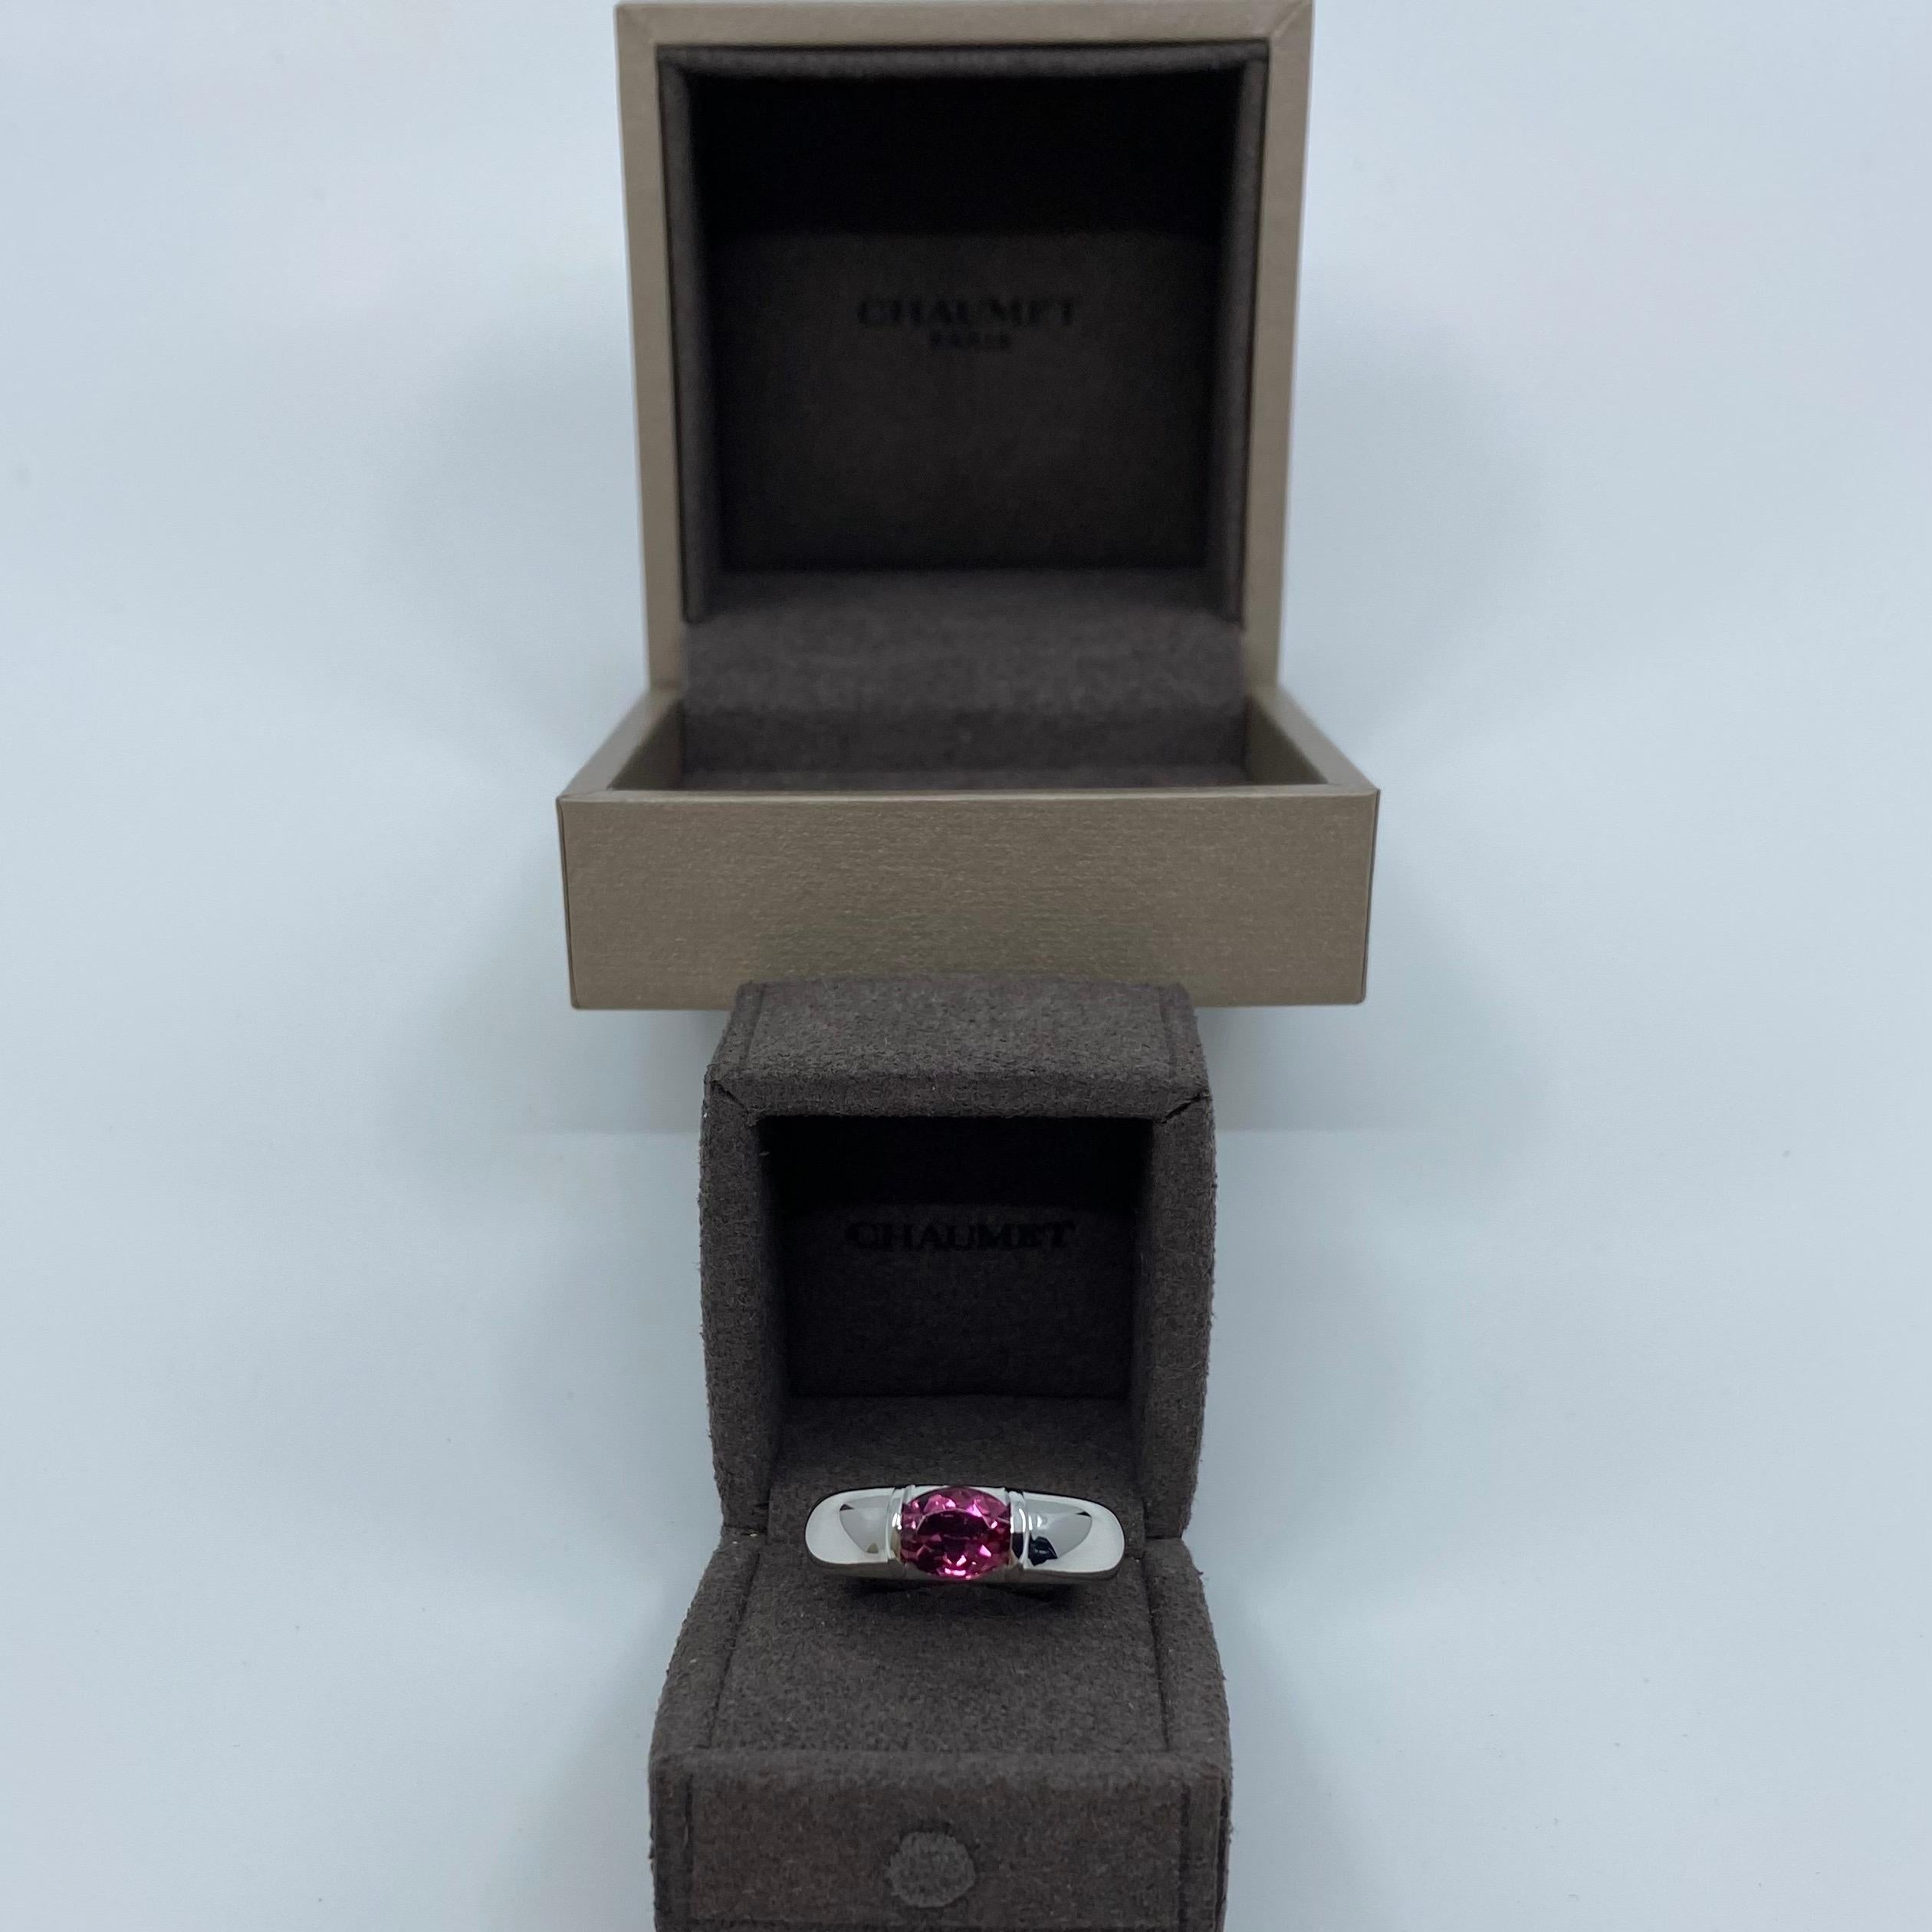 Rare Vintage Chaumet Paris Pink Tourmaline 18K White Gold Ring

Stunning 1.20 Carat fine pink tourmaline with an excellent oval cut and clarity. Fine jewellery houses like Chaumet only use the fines gemstones in their jewellery, this stone is no